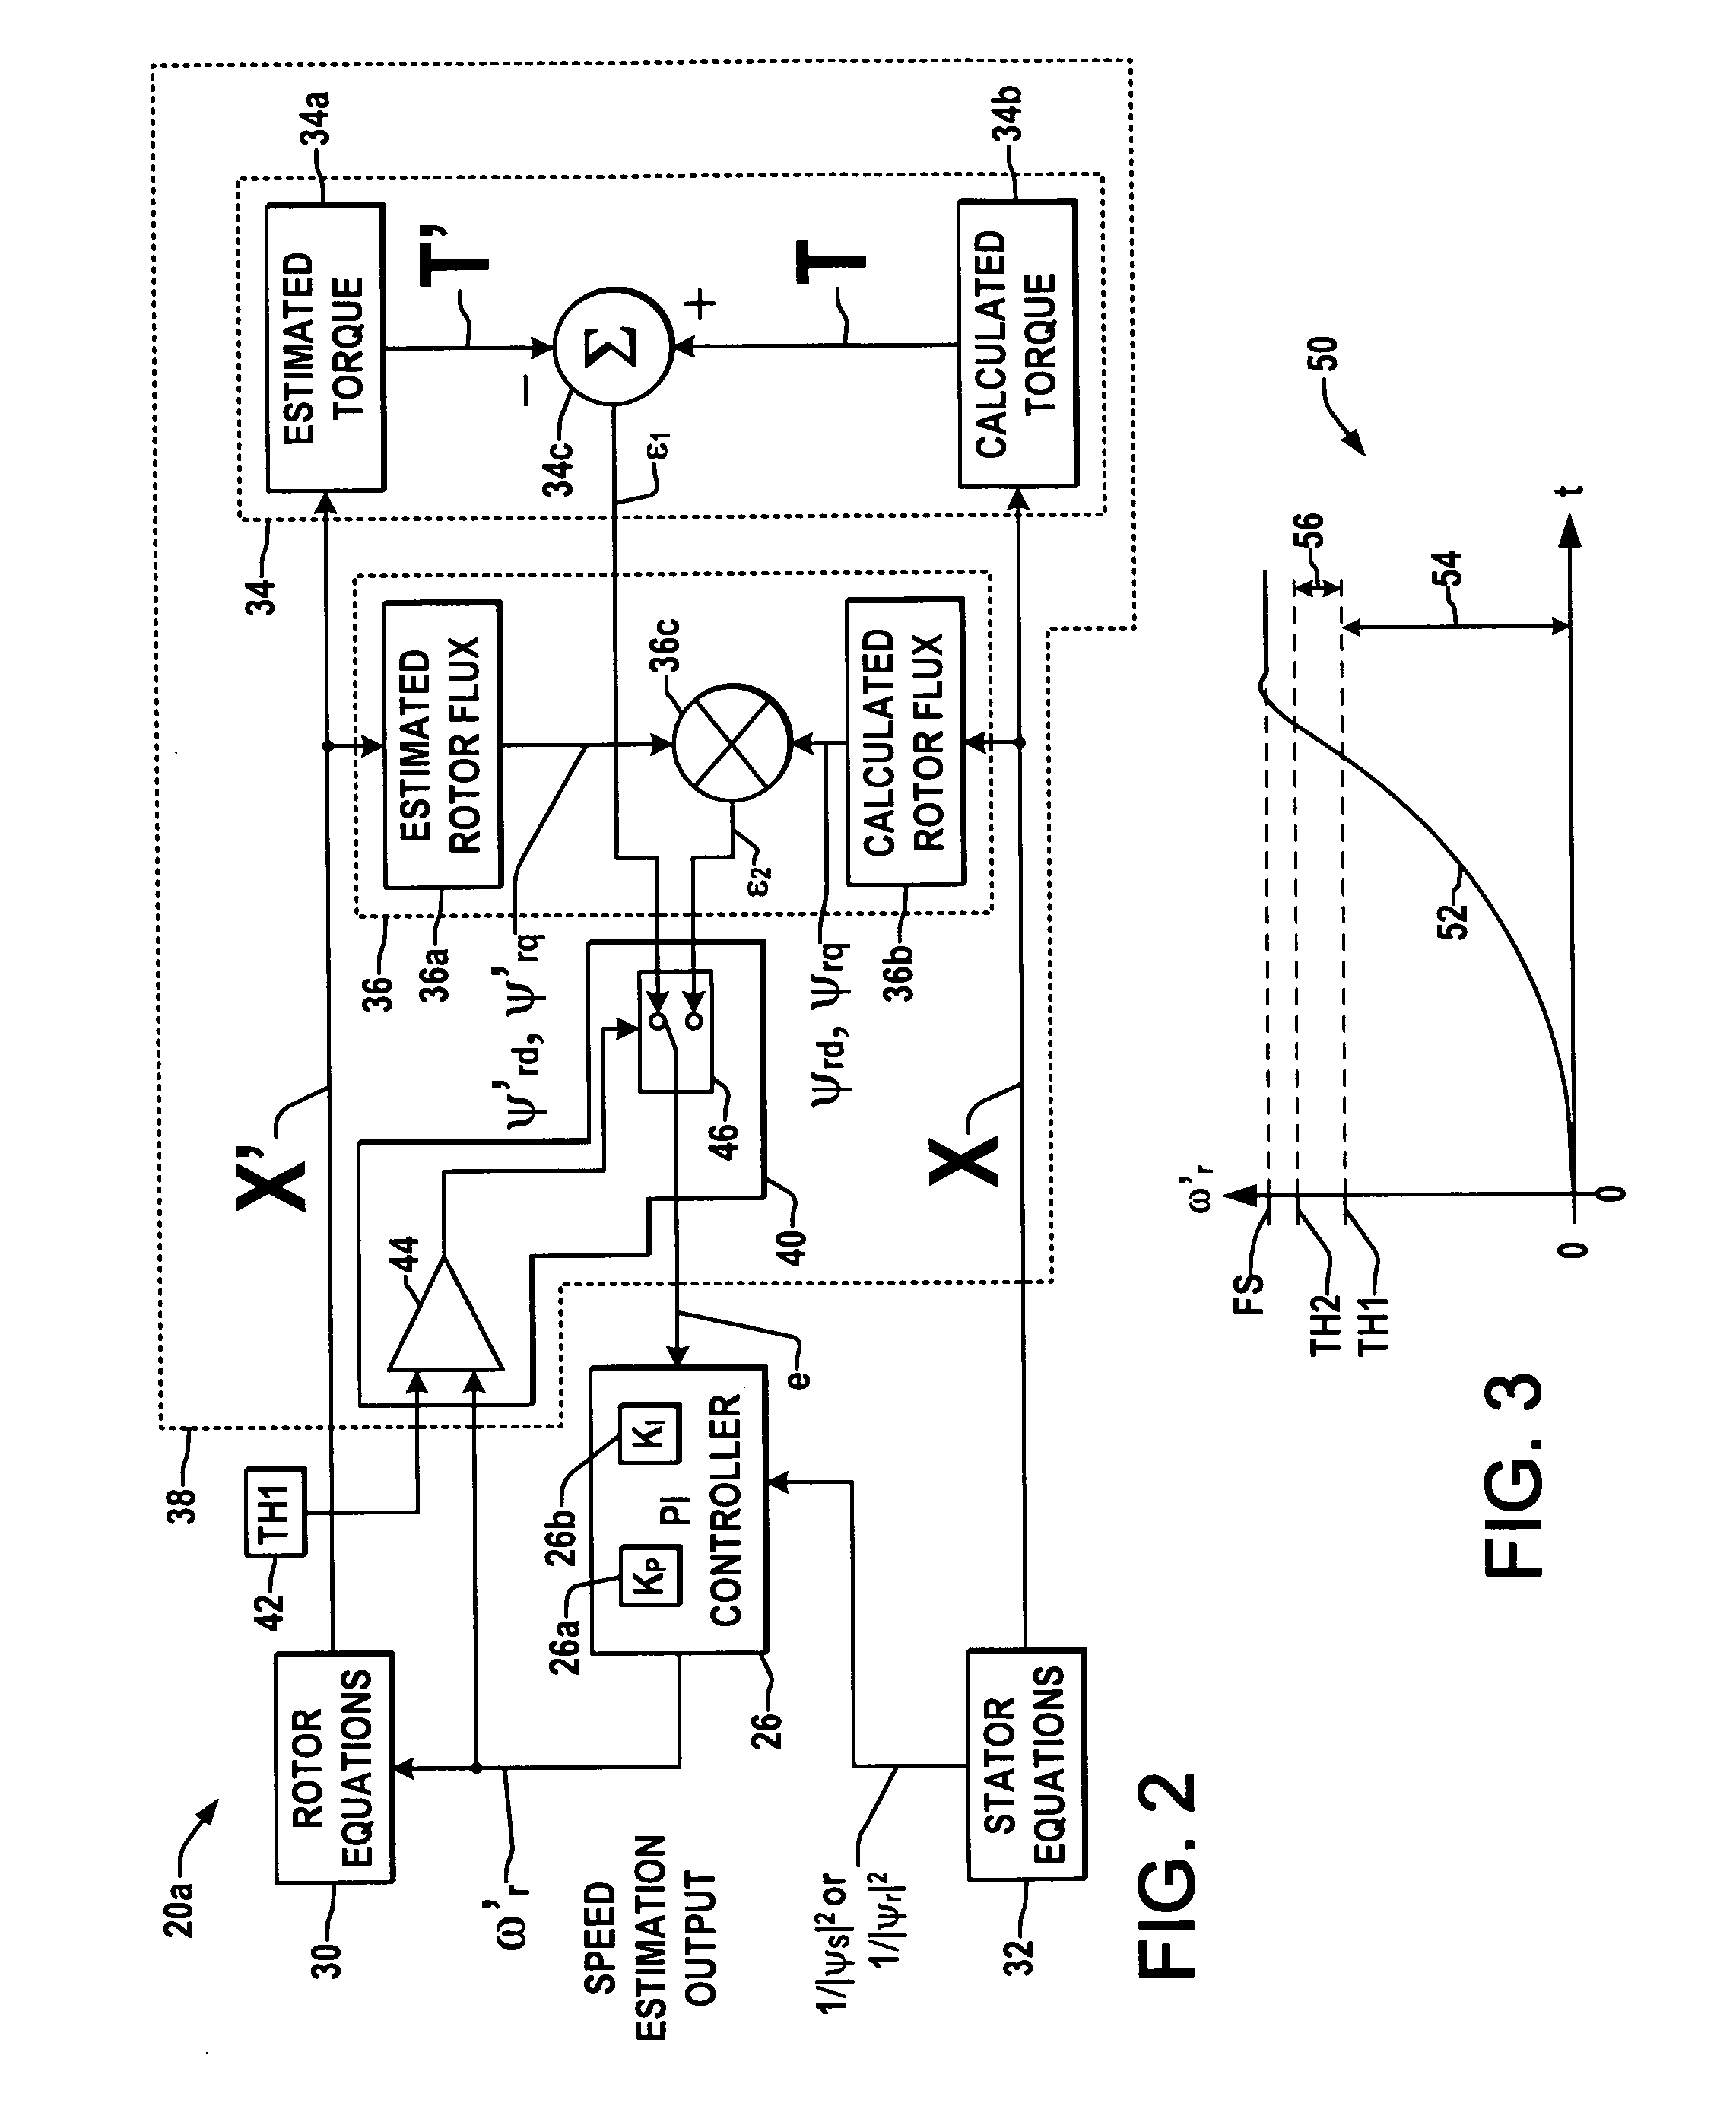 System and method for motor speed estimation using hybrid model reference adaptive system